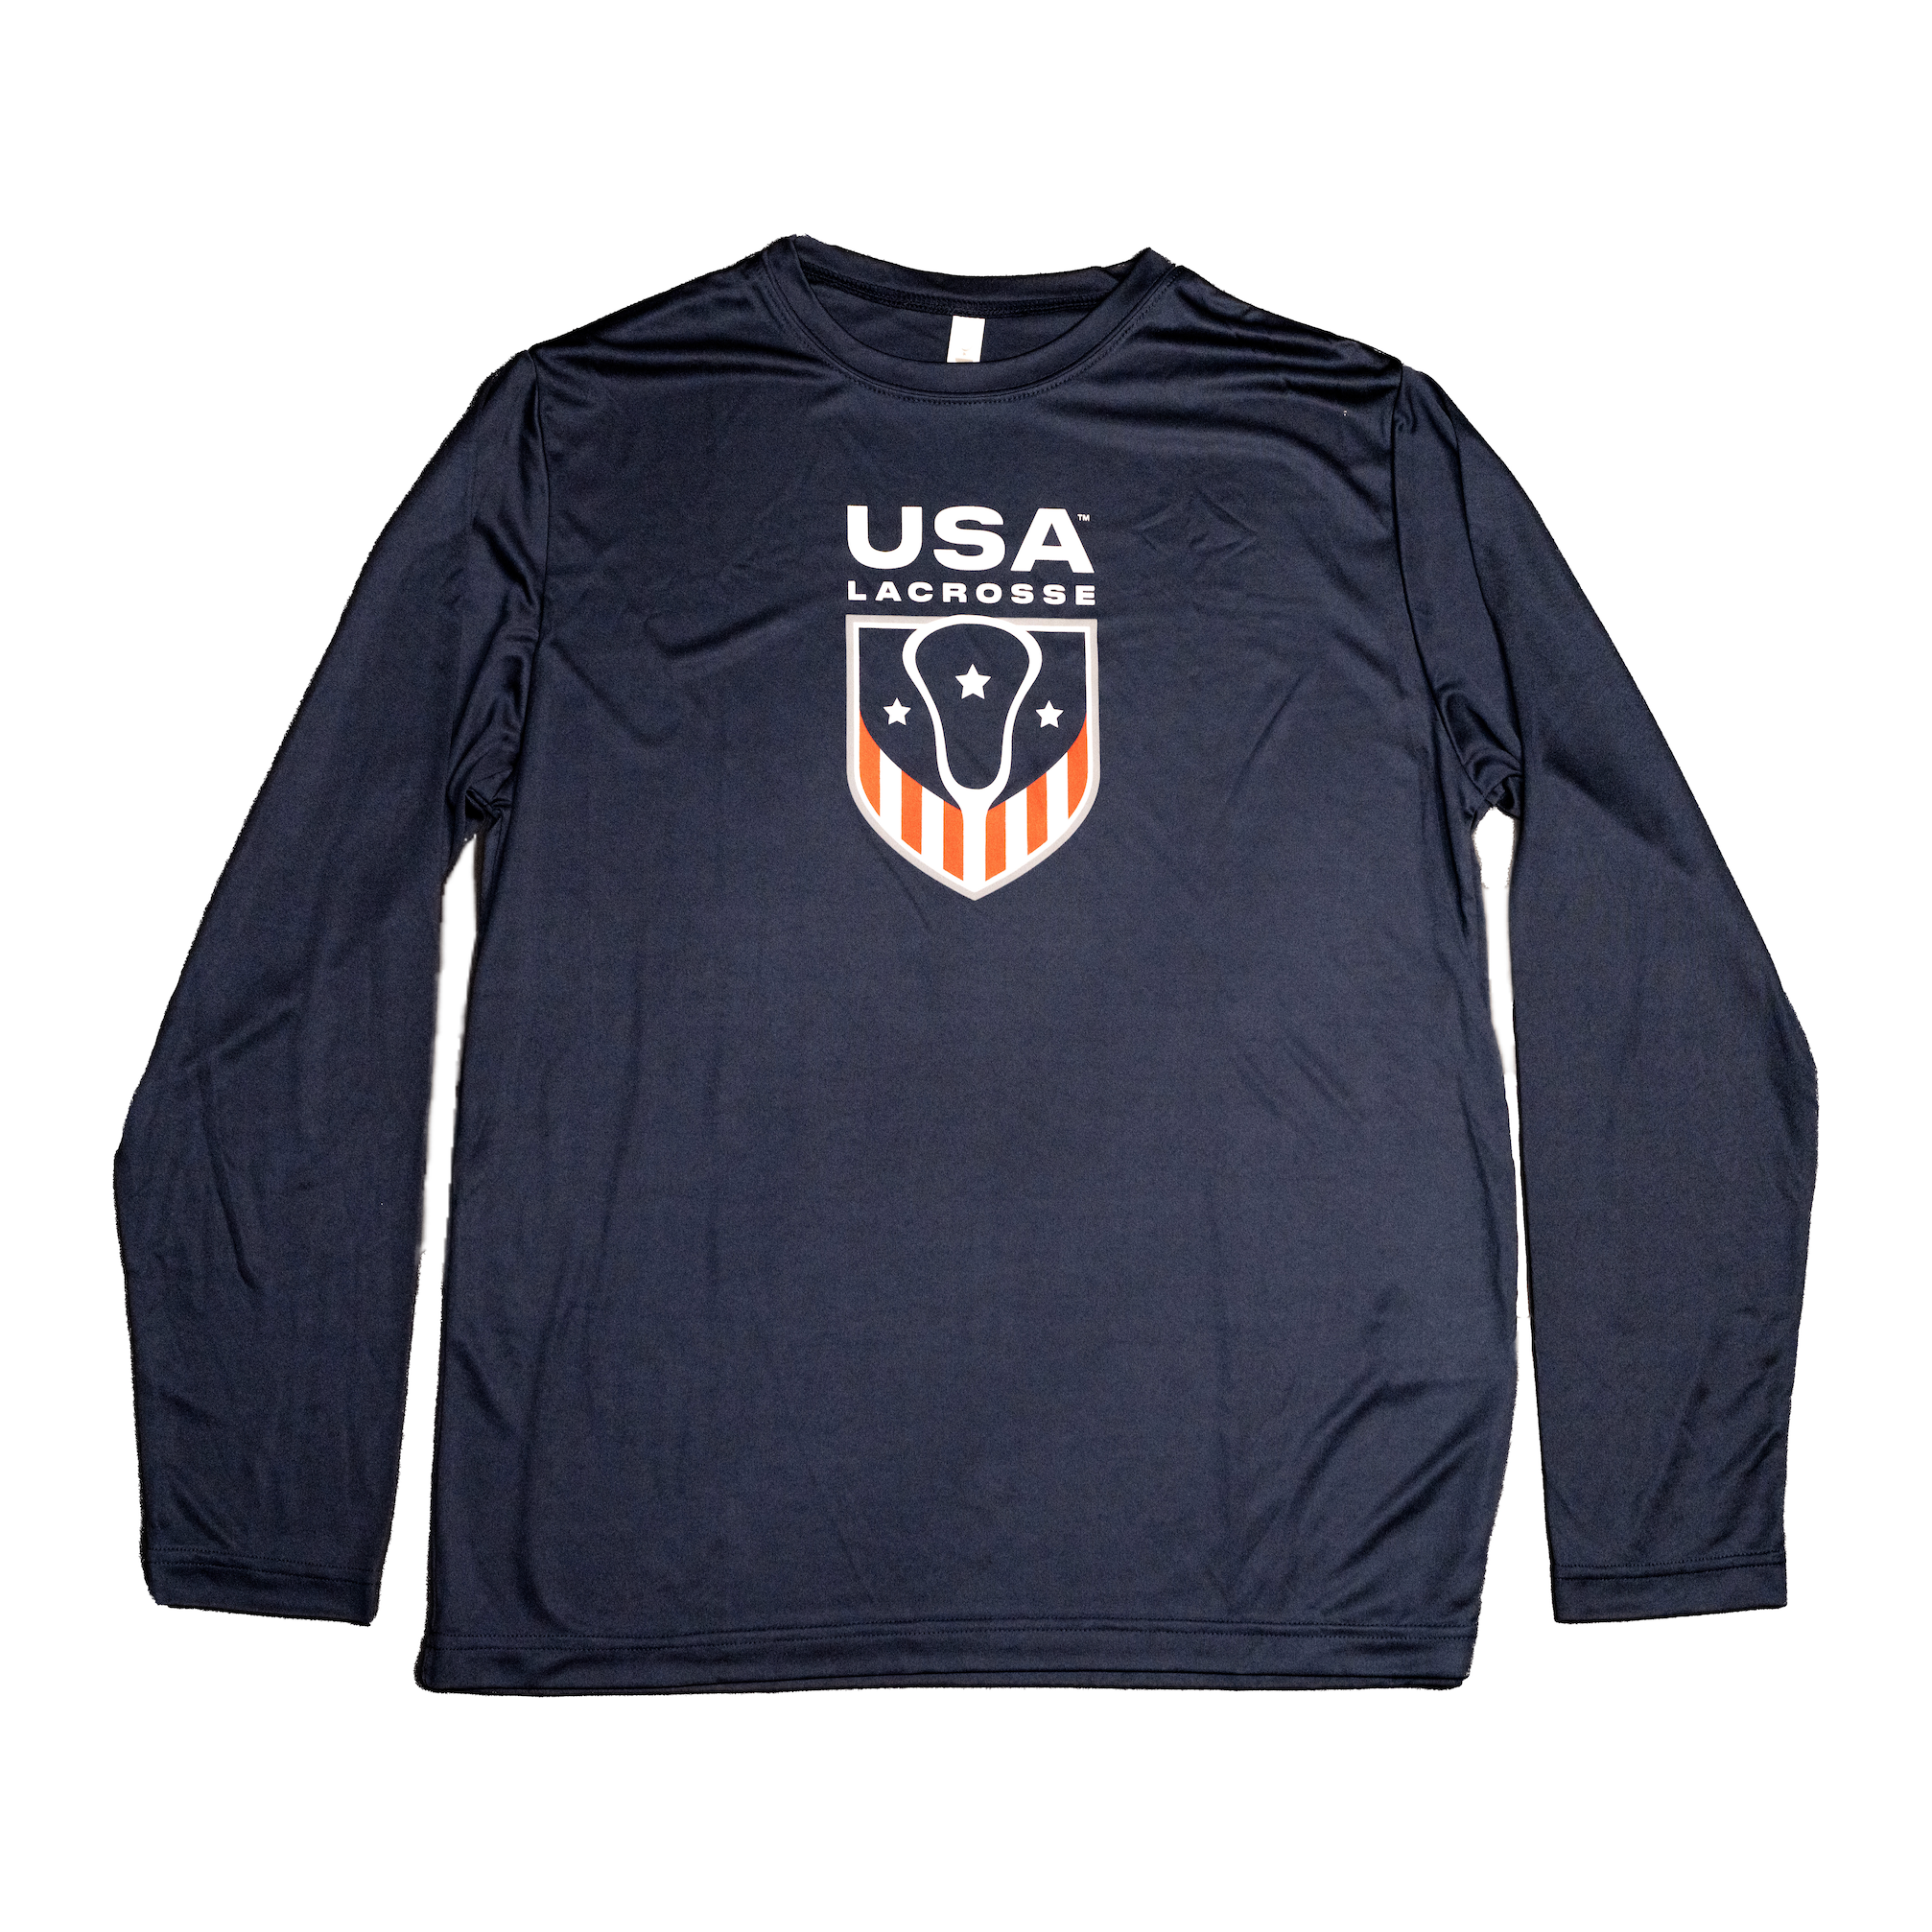 Adult's USA Lacrosse Cotton 365 Long Sleeve